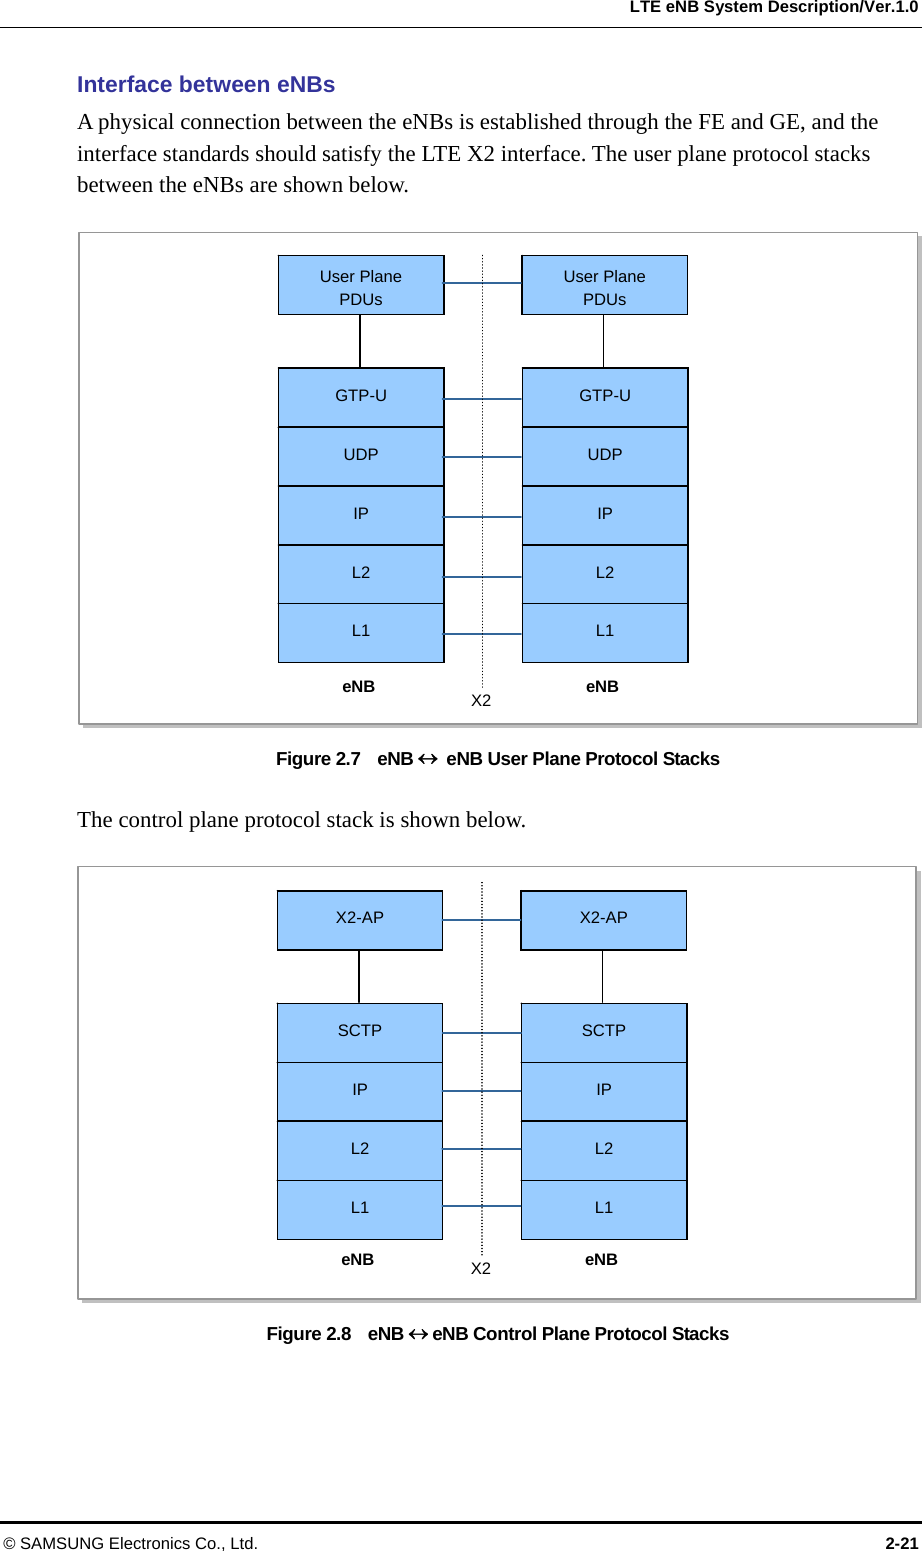  LTE eNB System Description/Ver.1.0 Interface between eNBs   A physical connection between the eNBs is established through the FE and GE, and the interface standards should satisfy the LTE X2 interface. The user plane protocol stacks between the eNBs are shown below.    eNB UDP IP L2 L1 eNB UDP IP L2 L1 GTP-U  GTP-U X2 PDUsUser Plane PDUsUser Plane Figure 2.7    eNB  eNB User Plane Protocol Stacks  The control plane protocol stack is shown below.  eNB IP L2 L1 eNB IP L2 L1 SCTP  SCTP X2 X2-AP X2-AP Figure 2.8    eNB eNB Control Plane Protocol Stacks  © SAMSUNG Electronics Co., Ltd.  2-21 